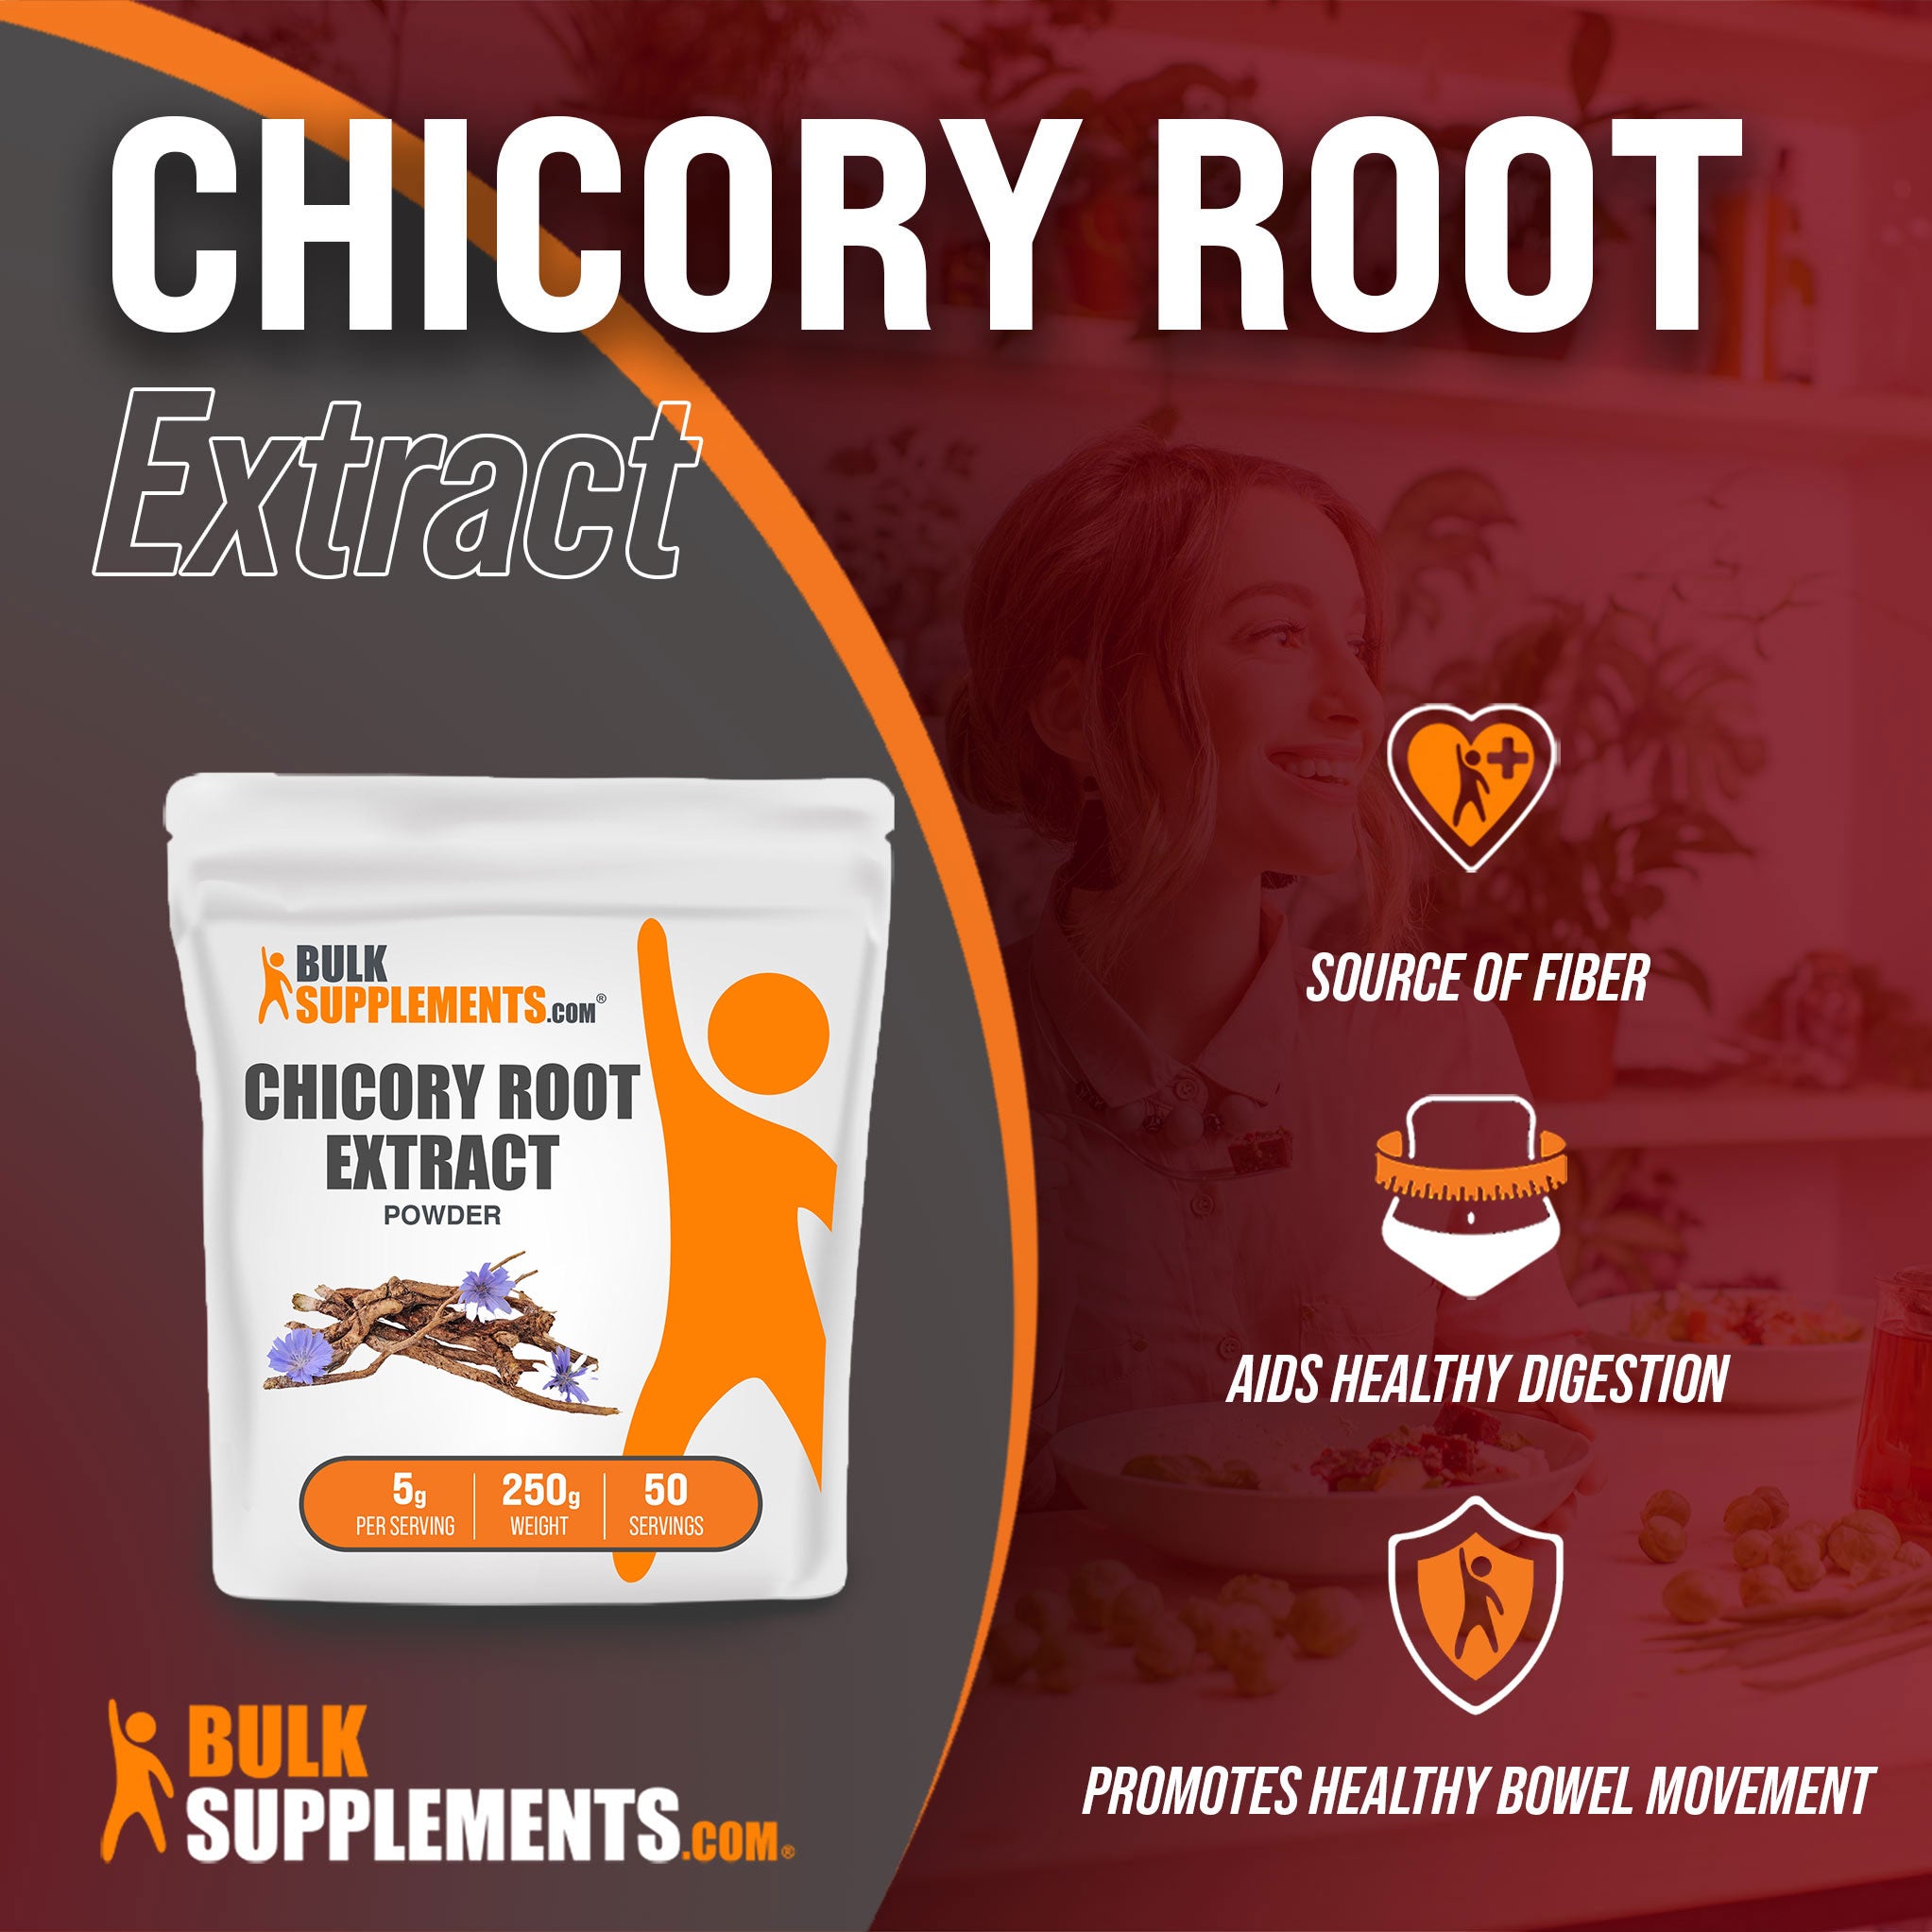 Benefits of 250g Chicory Root Extract Powder; fiber supplement, aids healthy digestion, promotes healthy bowel movement